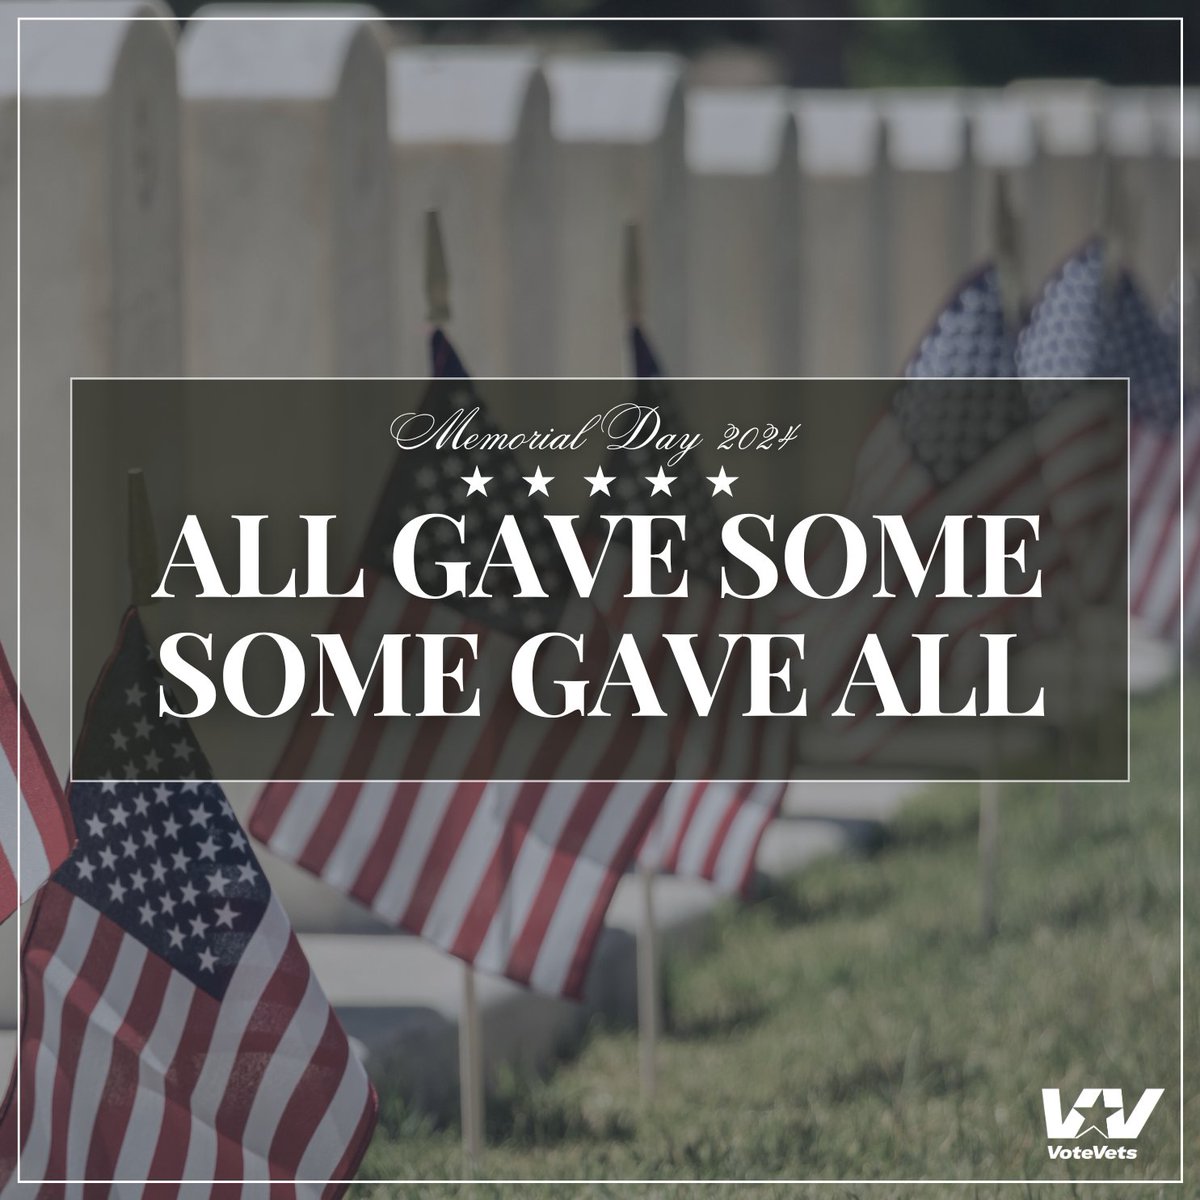 🇺🇸Today is #MemorialDay. We honor and remember the brave men and women who made the ultimate sacrifice for our nation. Their courage and dedication are the bedrock of our freedoms and democracy. May we honor their legacy and commit to upholding the values they fought for.